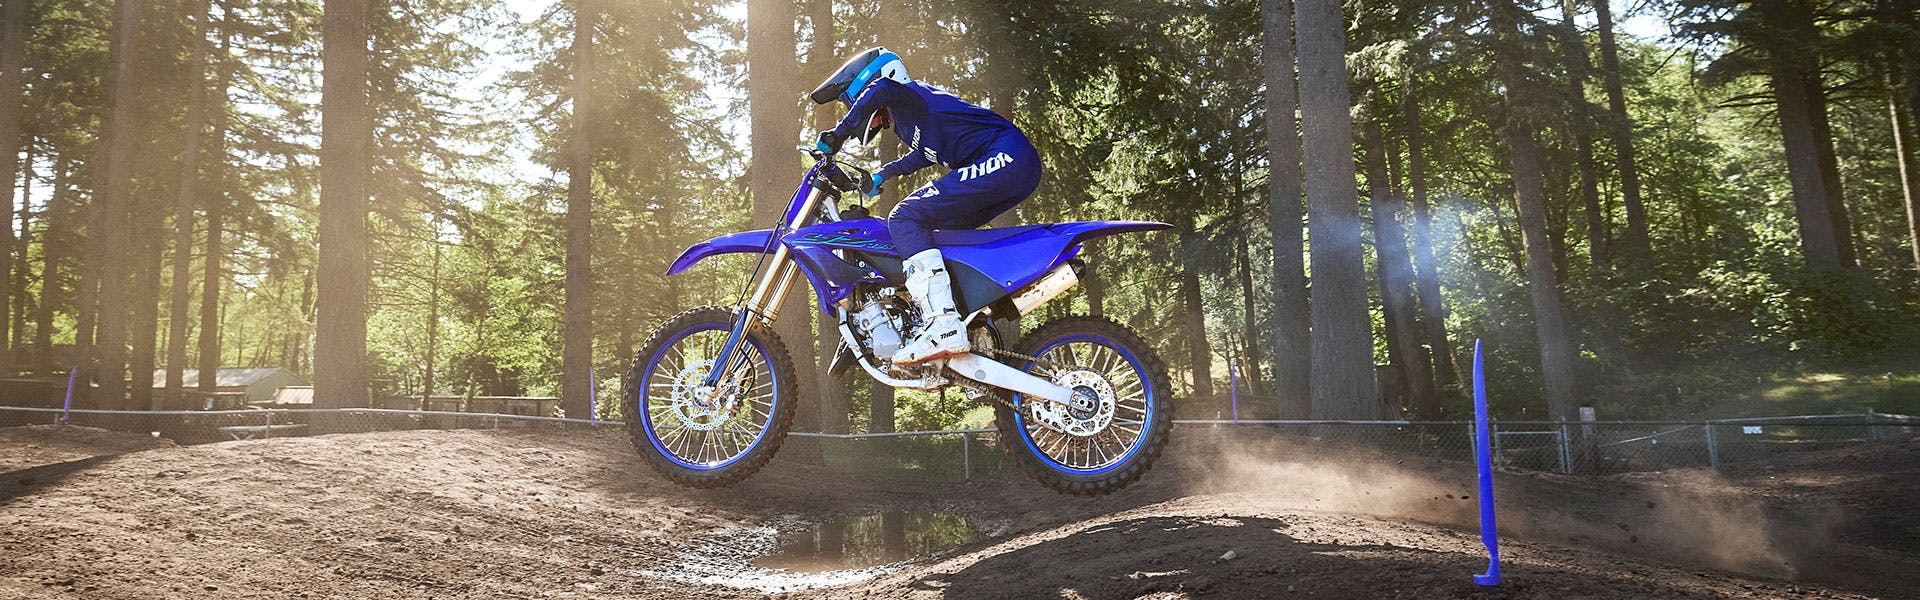 Yamaha YZ125 in team yamaha blue colour being ridden in off road track